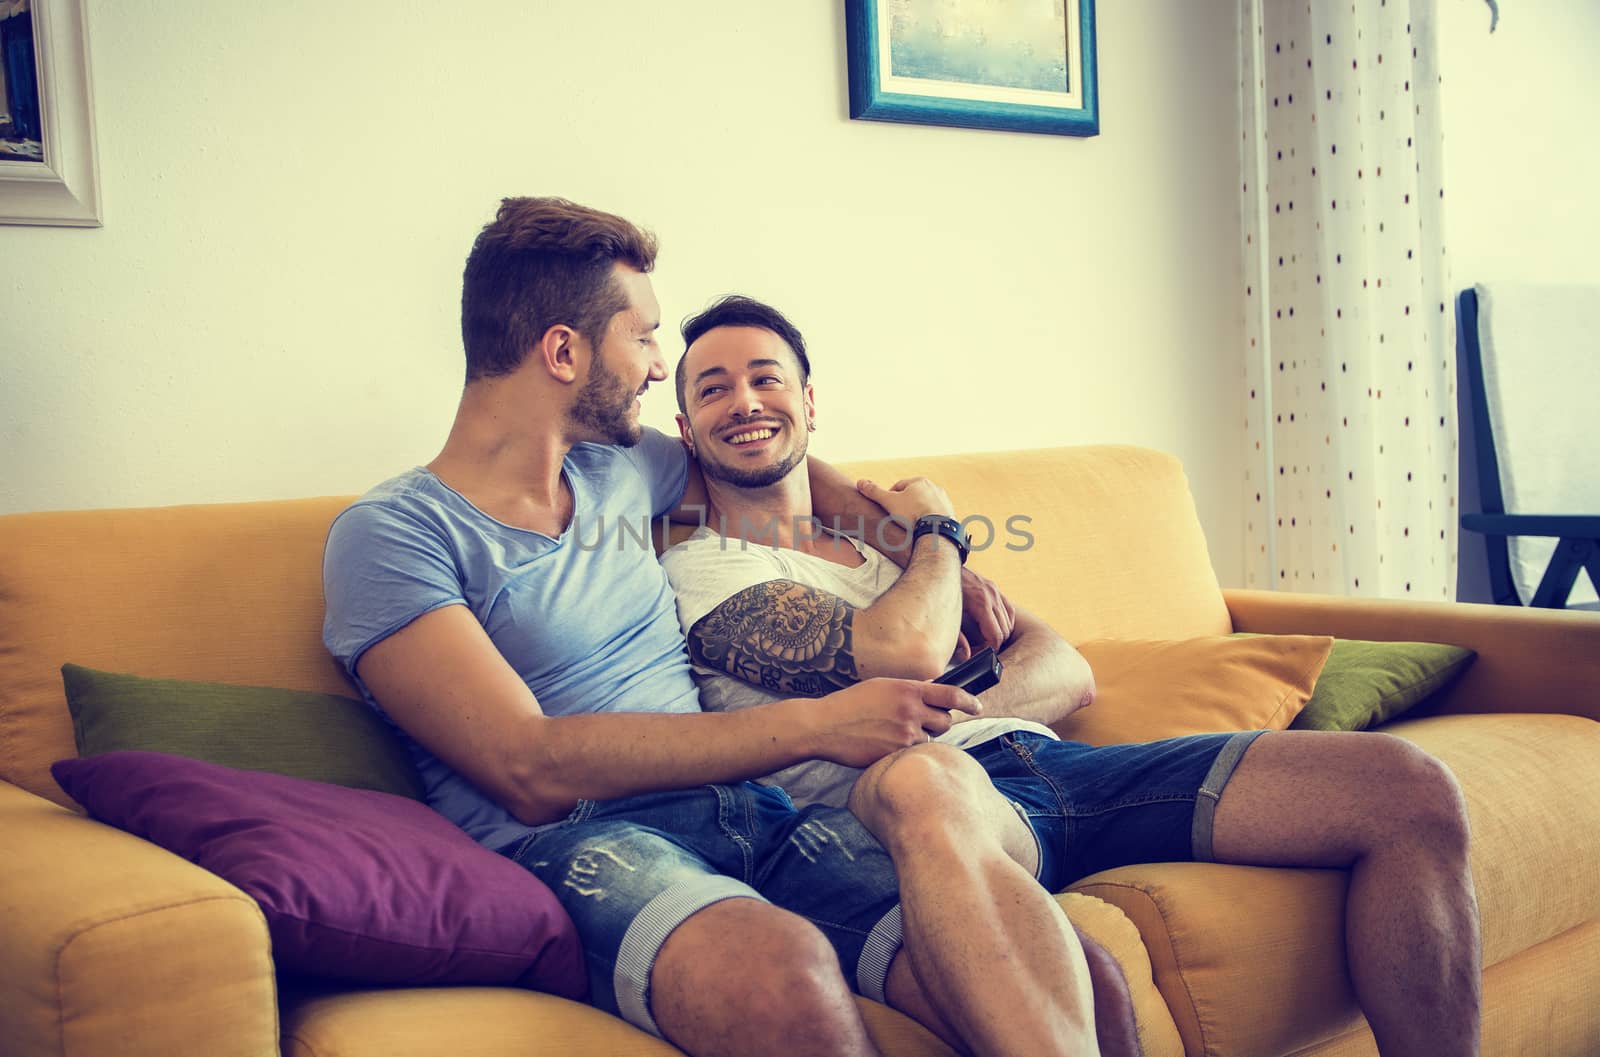 Two gay men on sofa embracing at home by artofphoto